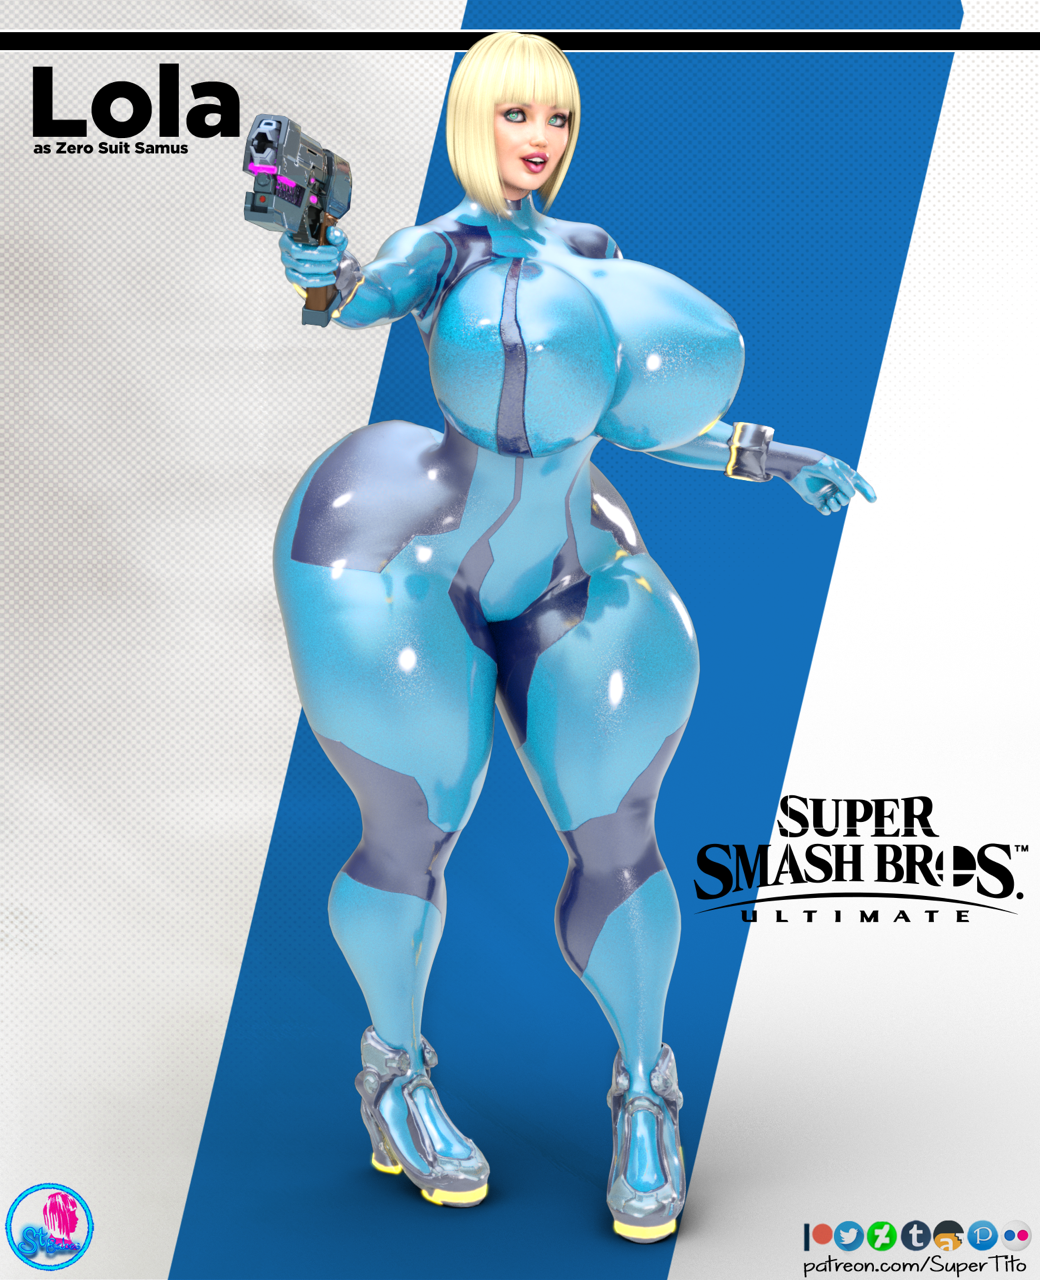 I am So hype for Super Smash Bros Ultimate. I will have more pics like this in the